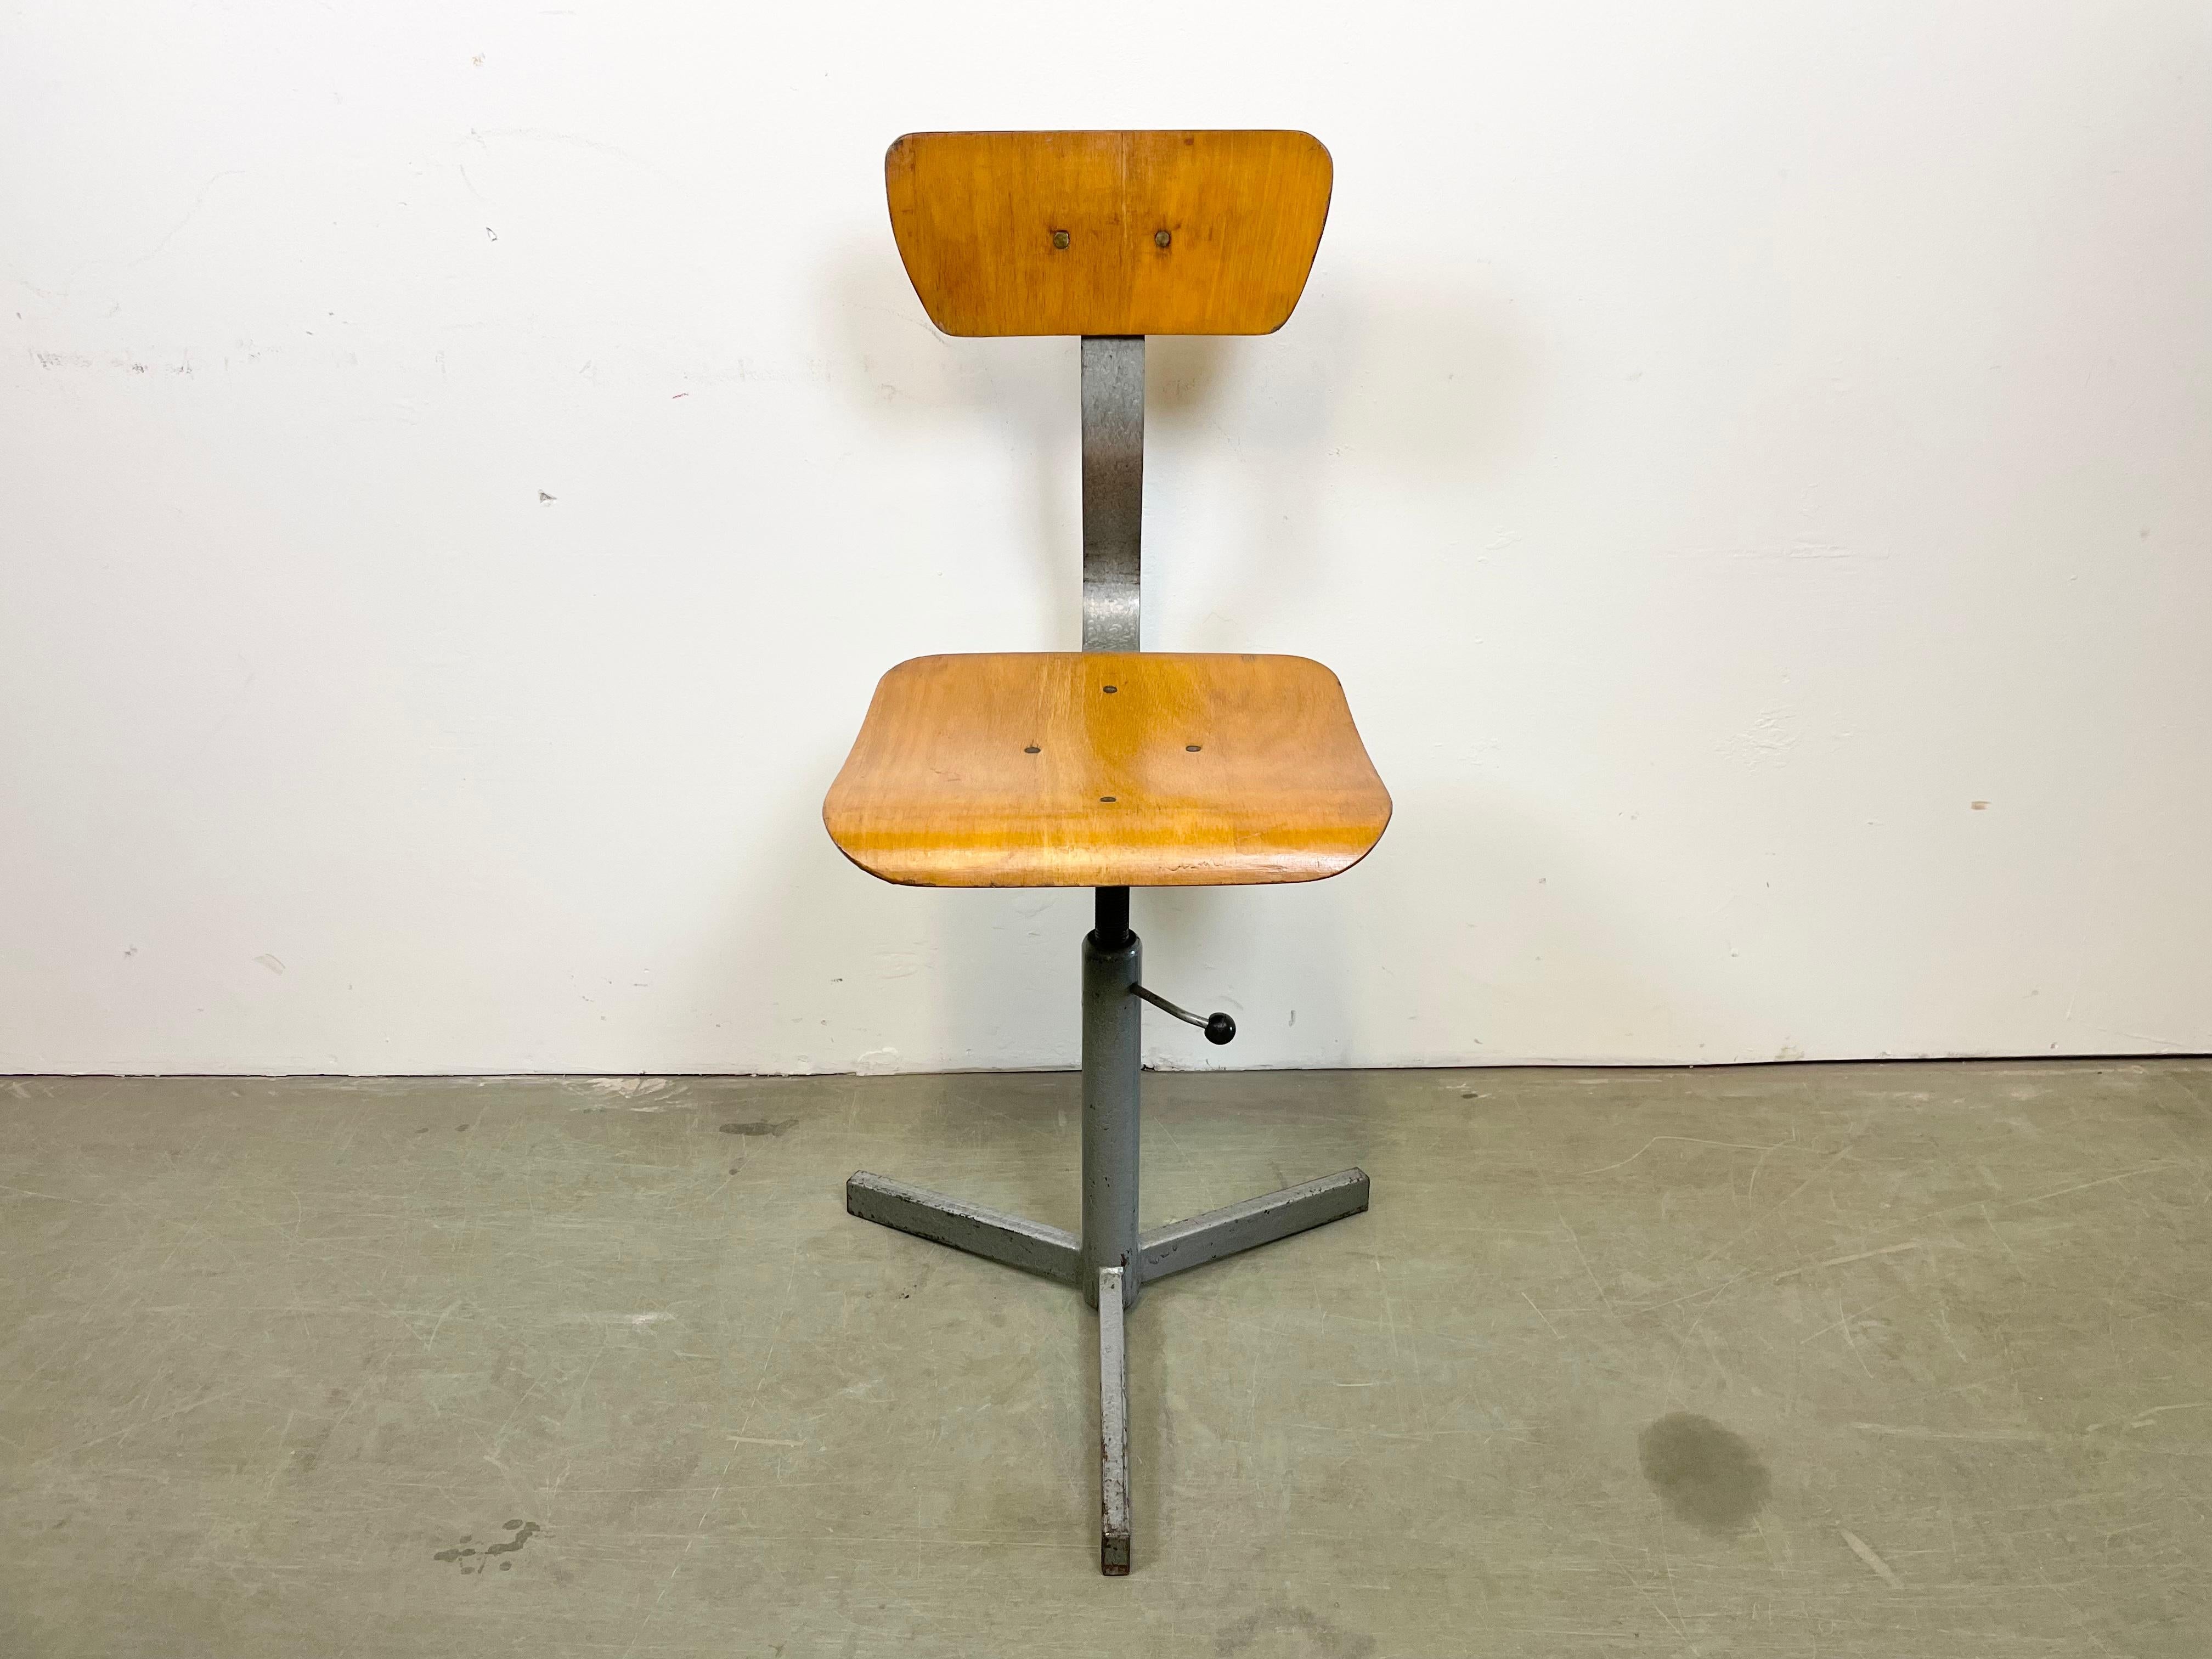 Industrial height adjustable swivel chair made in former Czechoslovakia during the 1960s. The construction is made of gray painted iron and has a plywood seat and backrest. The chair is in very good vintage condition. The weight of the chair is 8